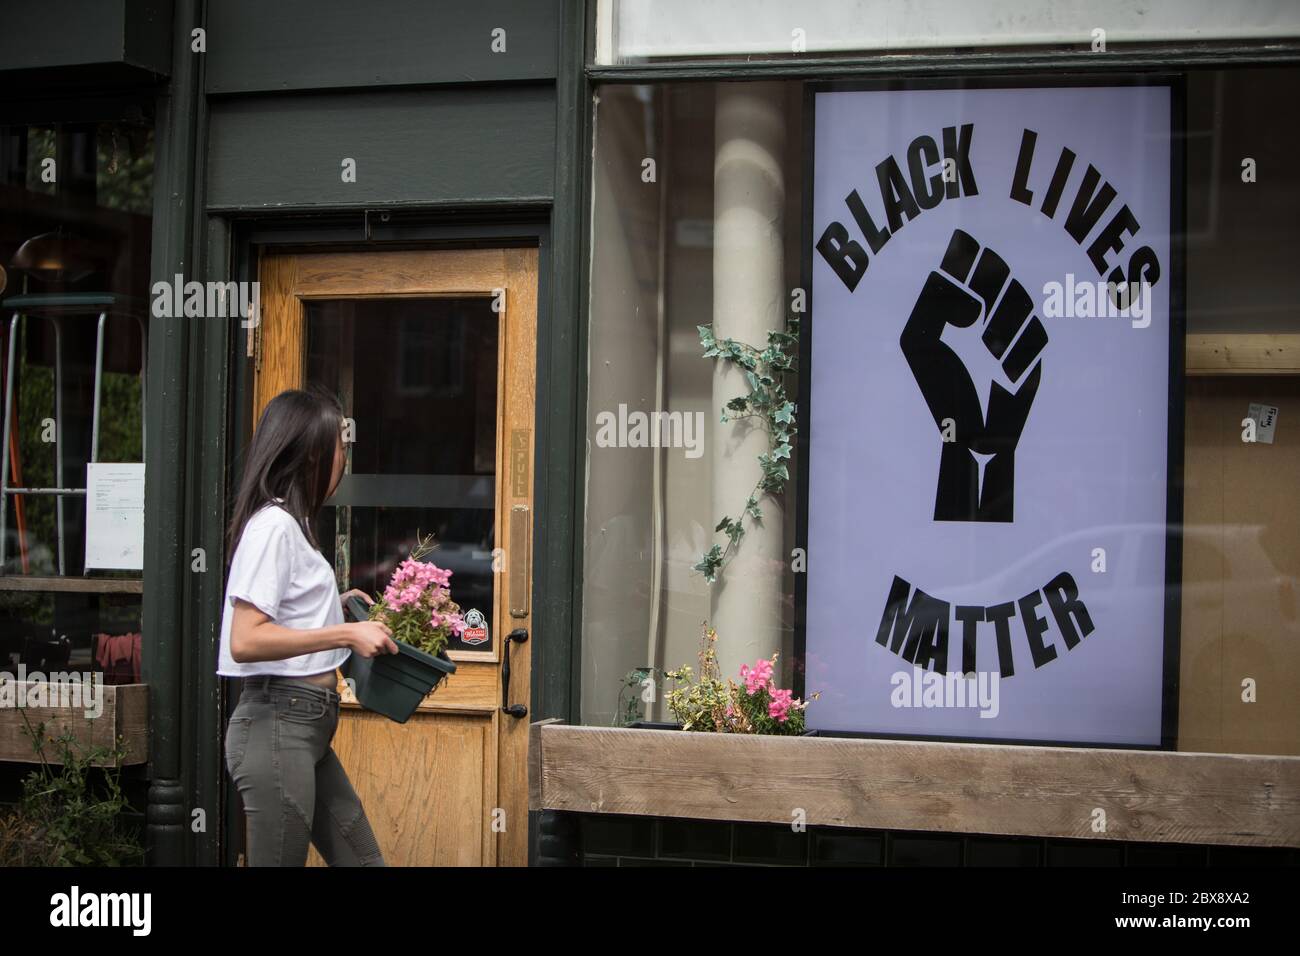 Glasgow, UK, 6th June 2020. 'Black Lives Matter' sign displayed on exterior of the Stag and Thistle bar and restaurant in the Strathbungo district, as they prepare to open for the first time to serve drinks and food as take-away. In Glasgow, Scotland, on 6 June 2020. Photo credit: Jeremy Sutton-Hibbert/Alamy Live News. Stock Photo